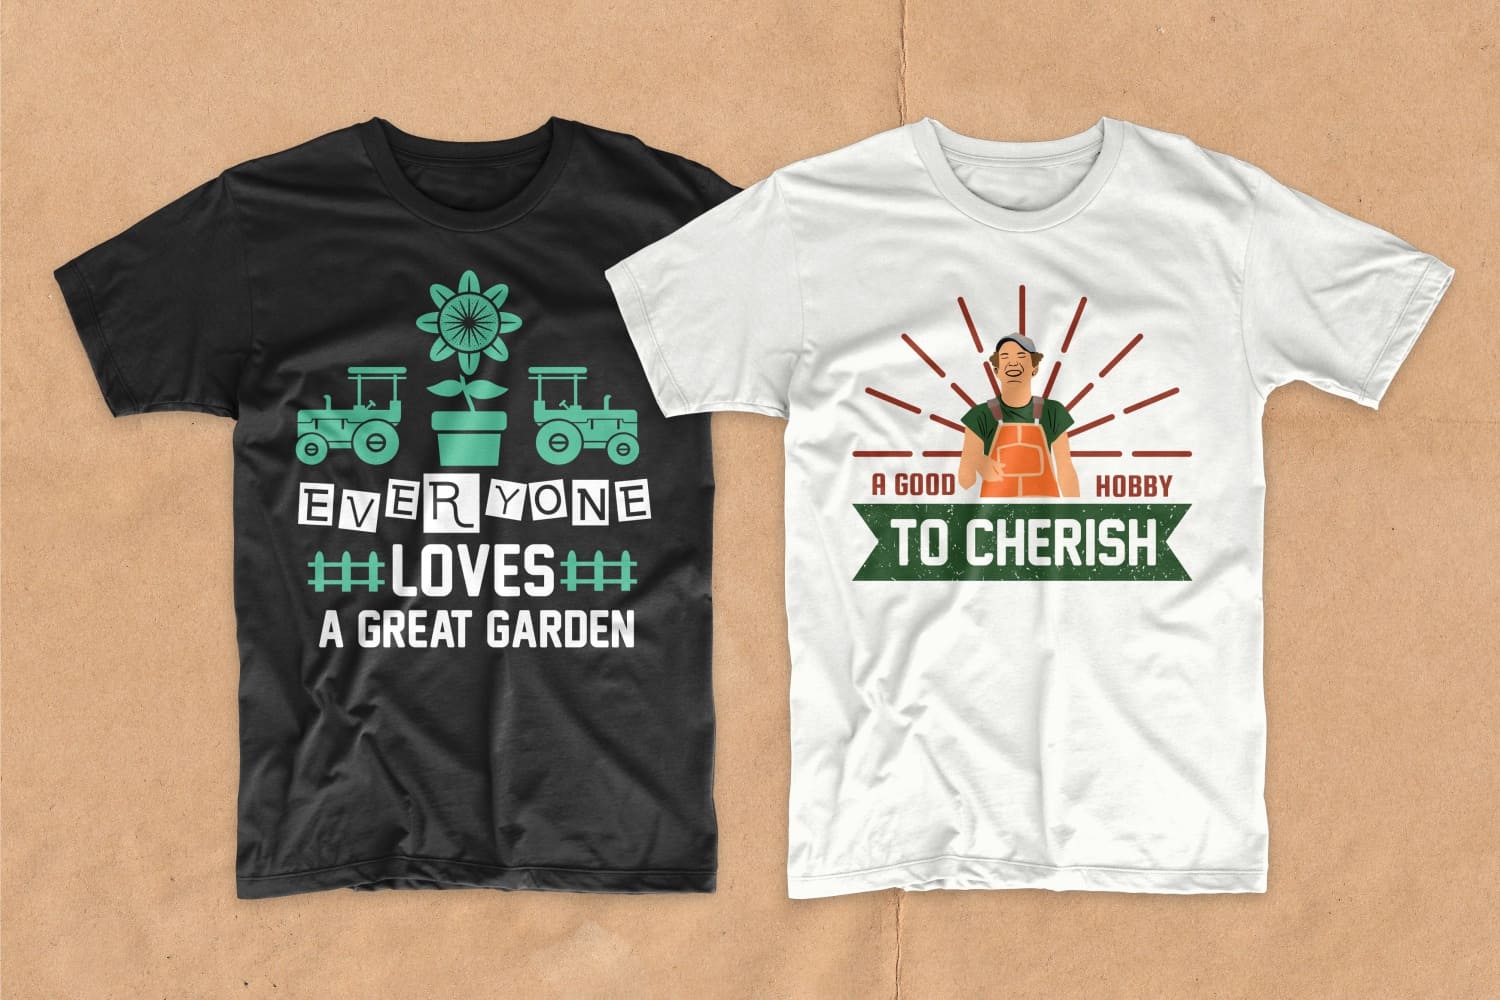 White and black T-shirts with a gardener and gardening tools.